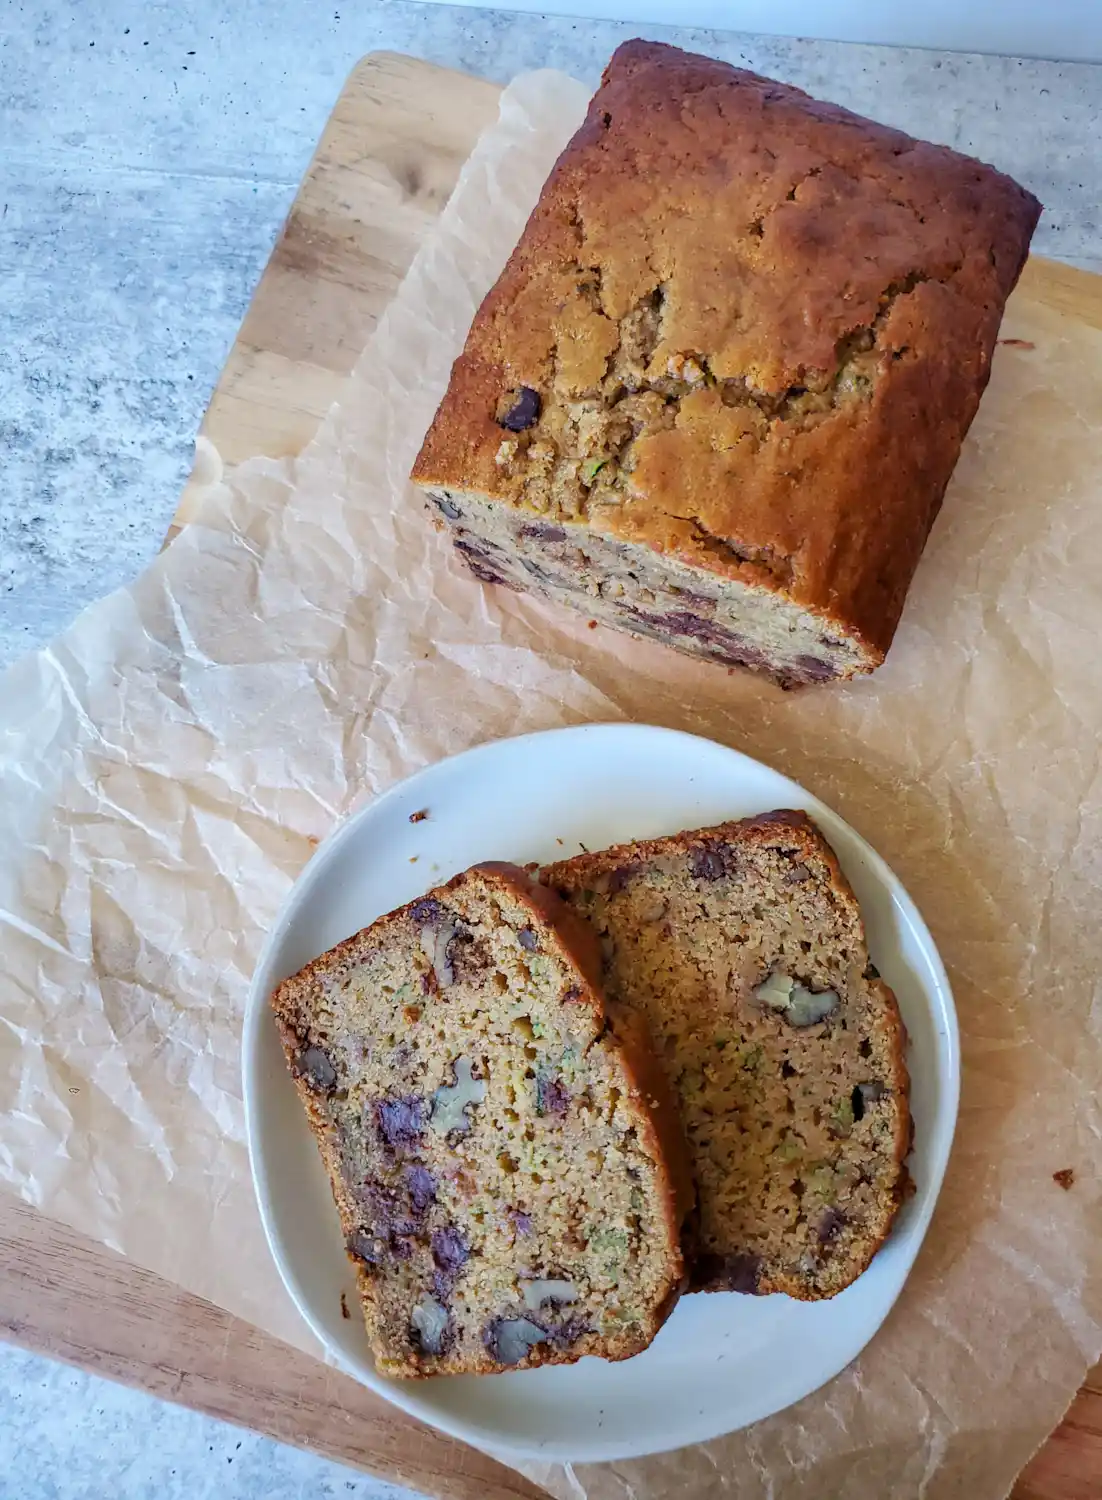 A birds eye view of two slices of sourdough zucchini bread with walnut and chocolate chips that are sitting on a white ceramic plate. Underneath is a piece of parchment paper and the remaining loaf of bread that has yet to be cut. 